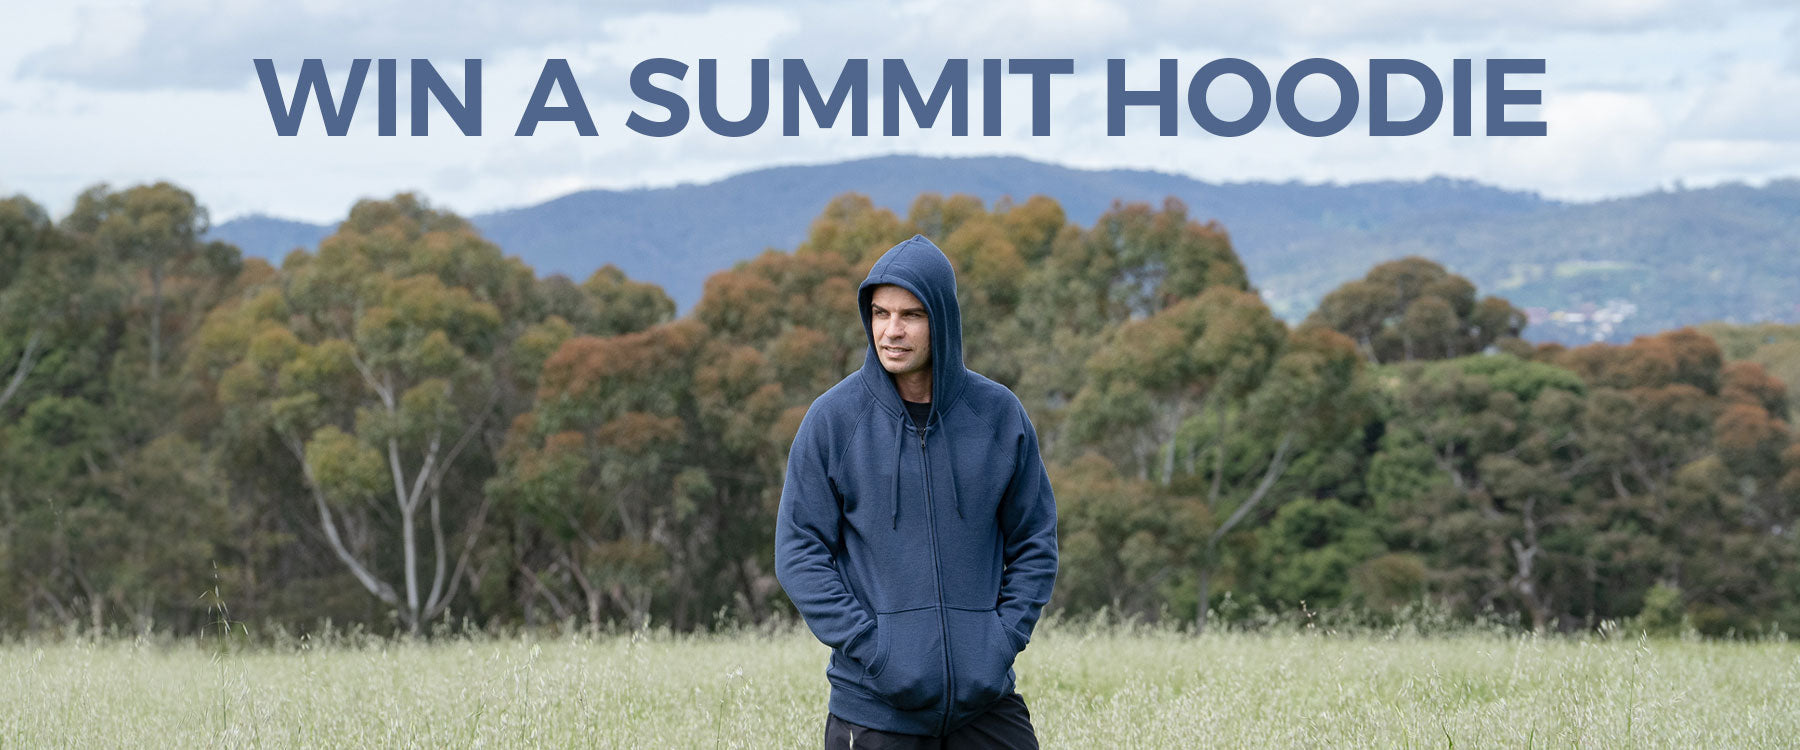 Latest Competition: Win a Summit Hoodie